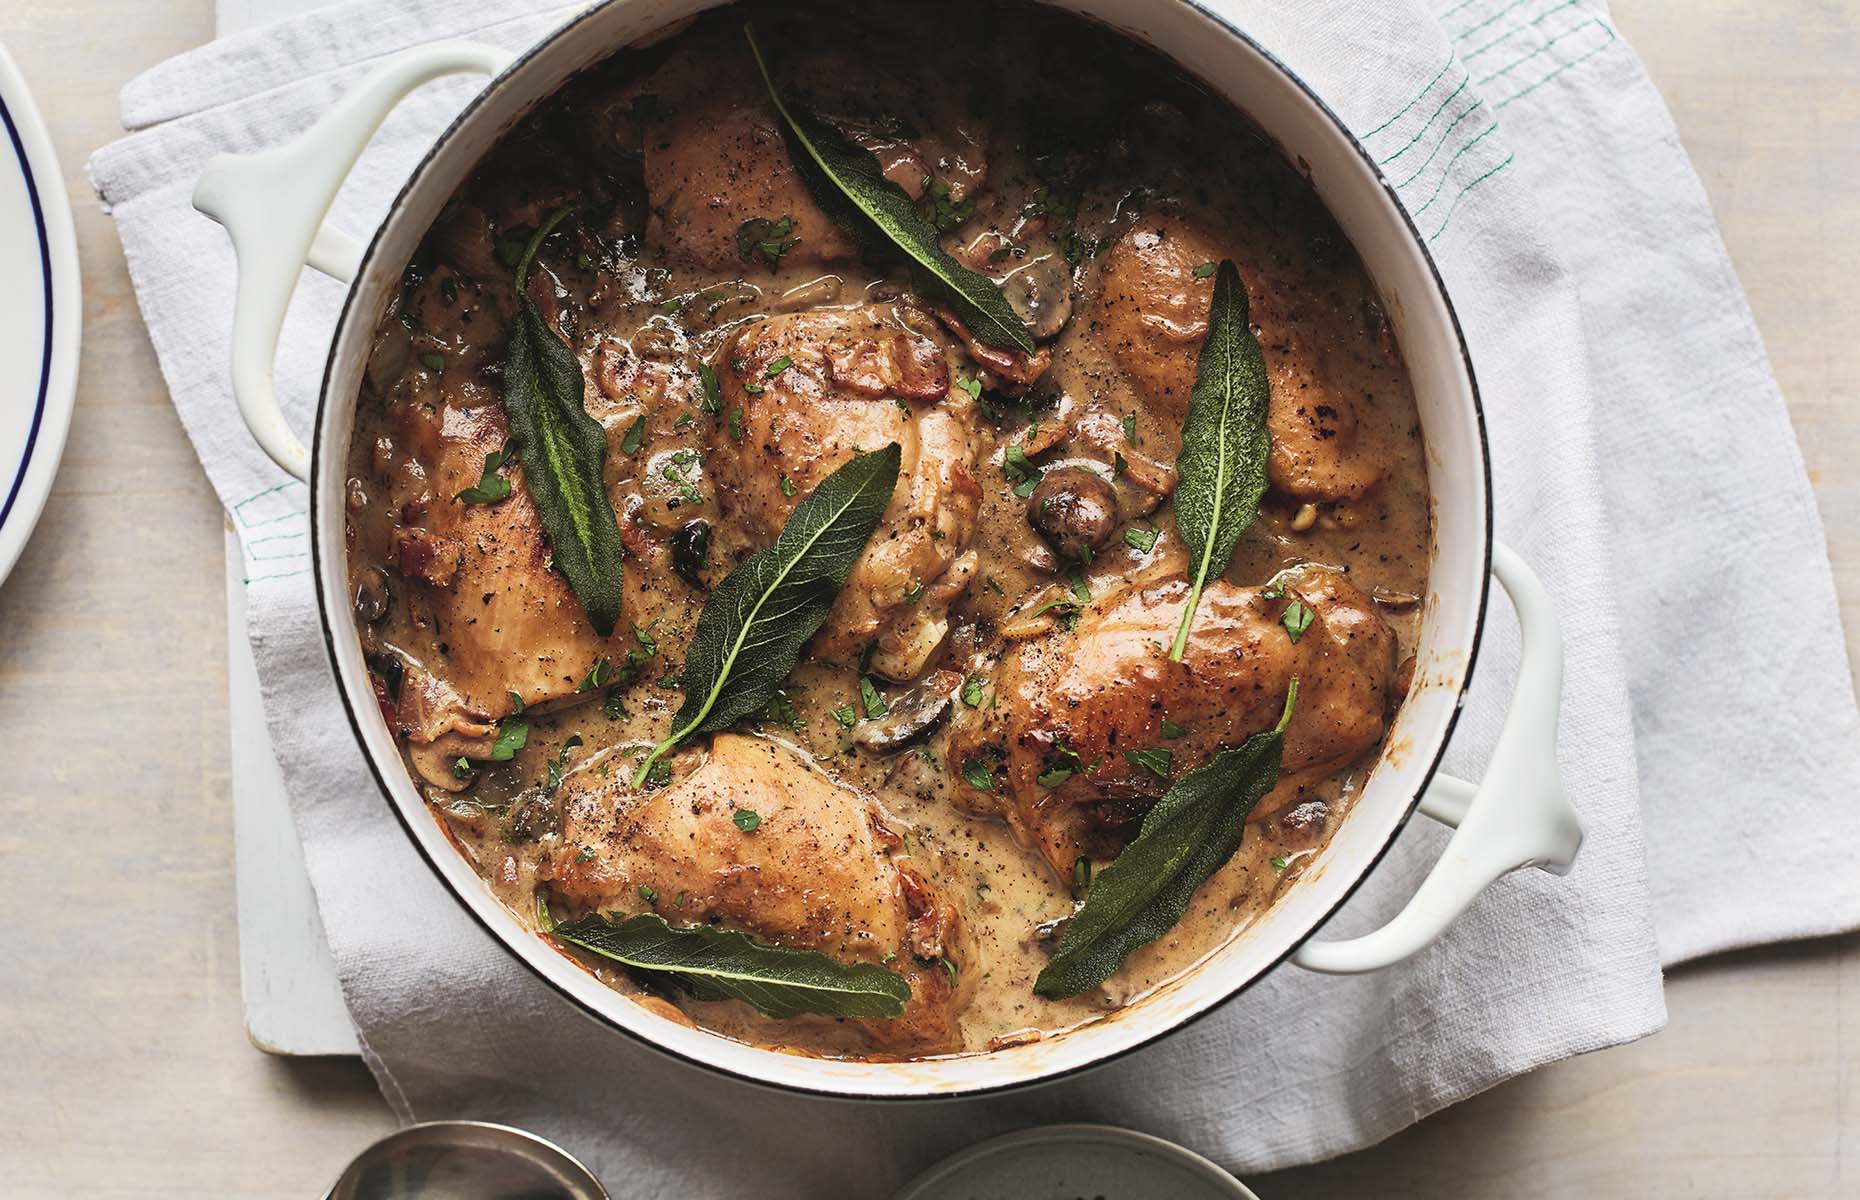 Mary Berry's chicken casserole (Image: Love to Cook/BBC Books)